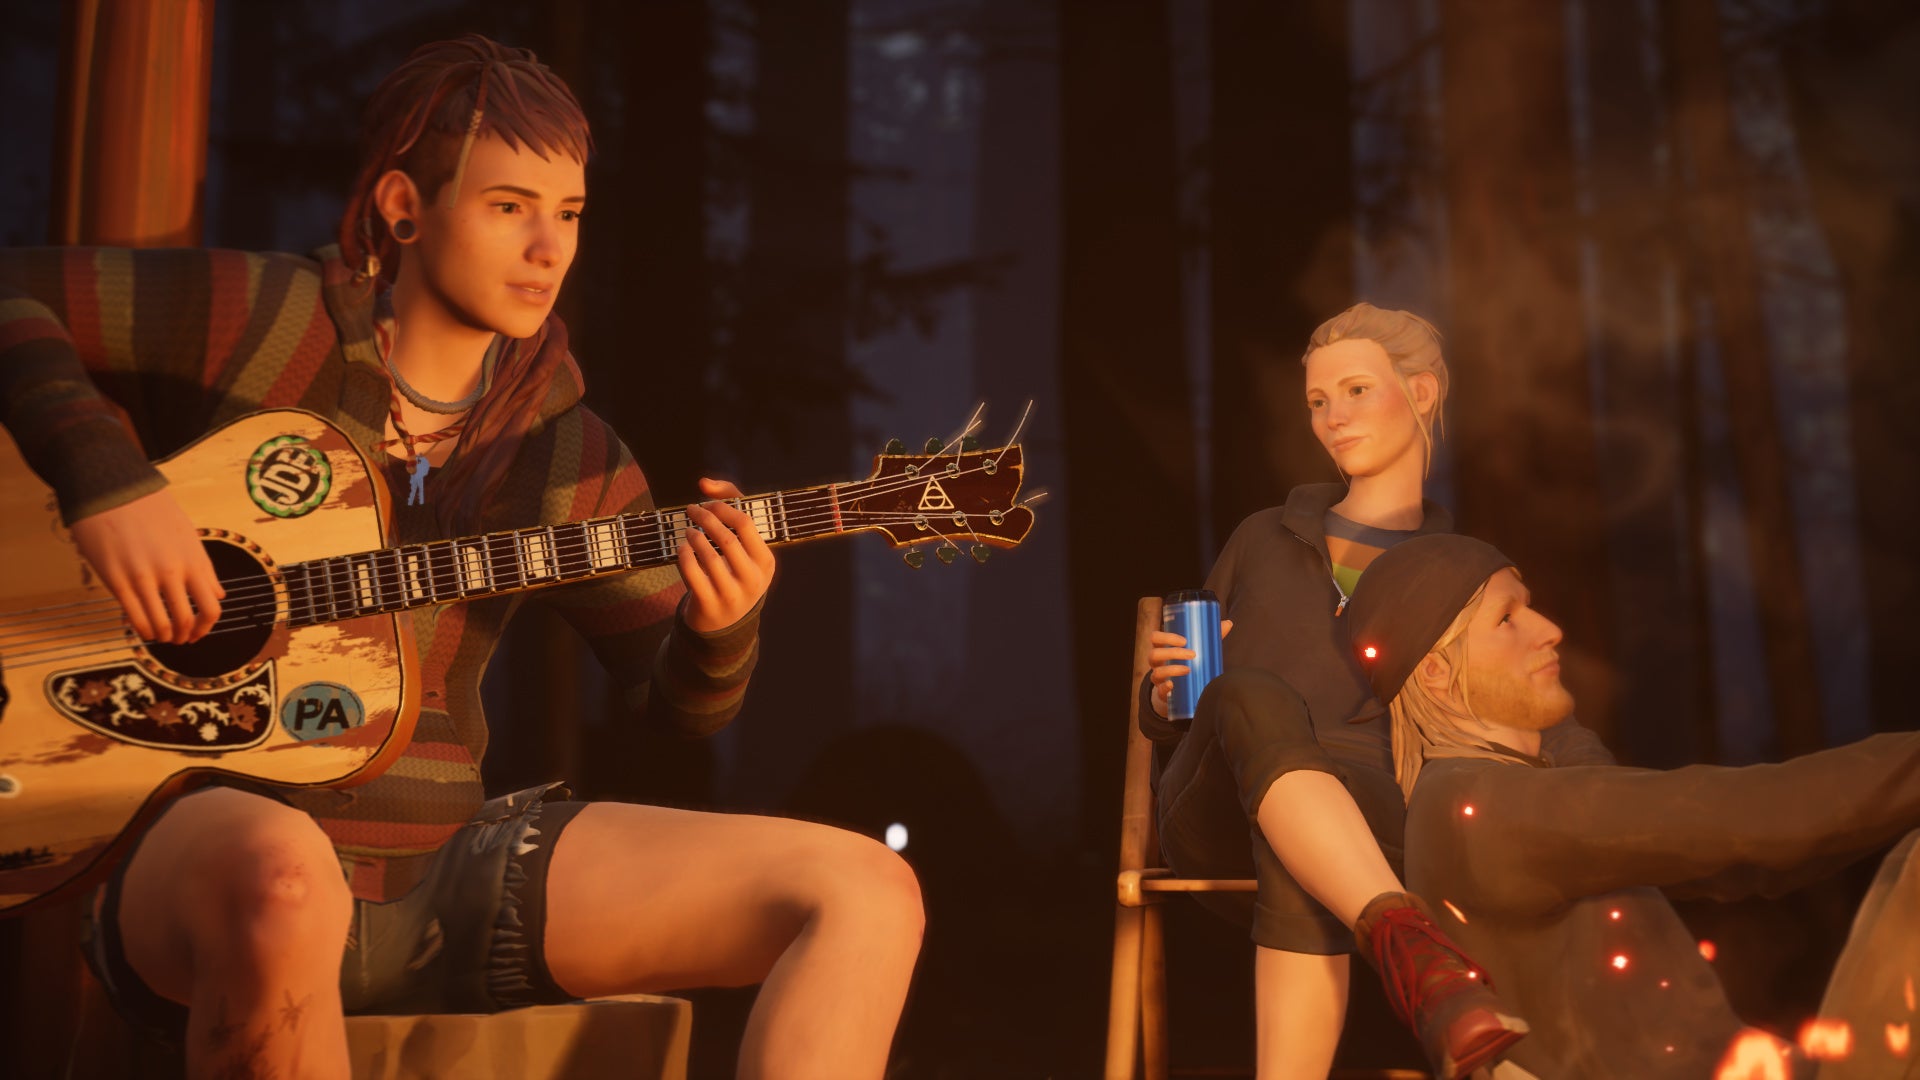 A screenshot of a scene from a game called Life is Strange